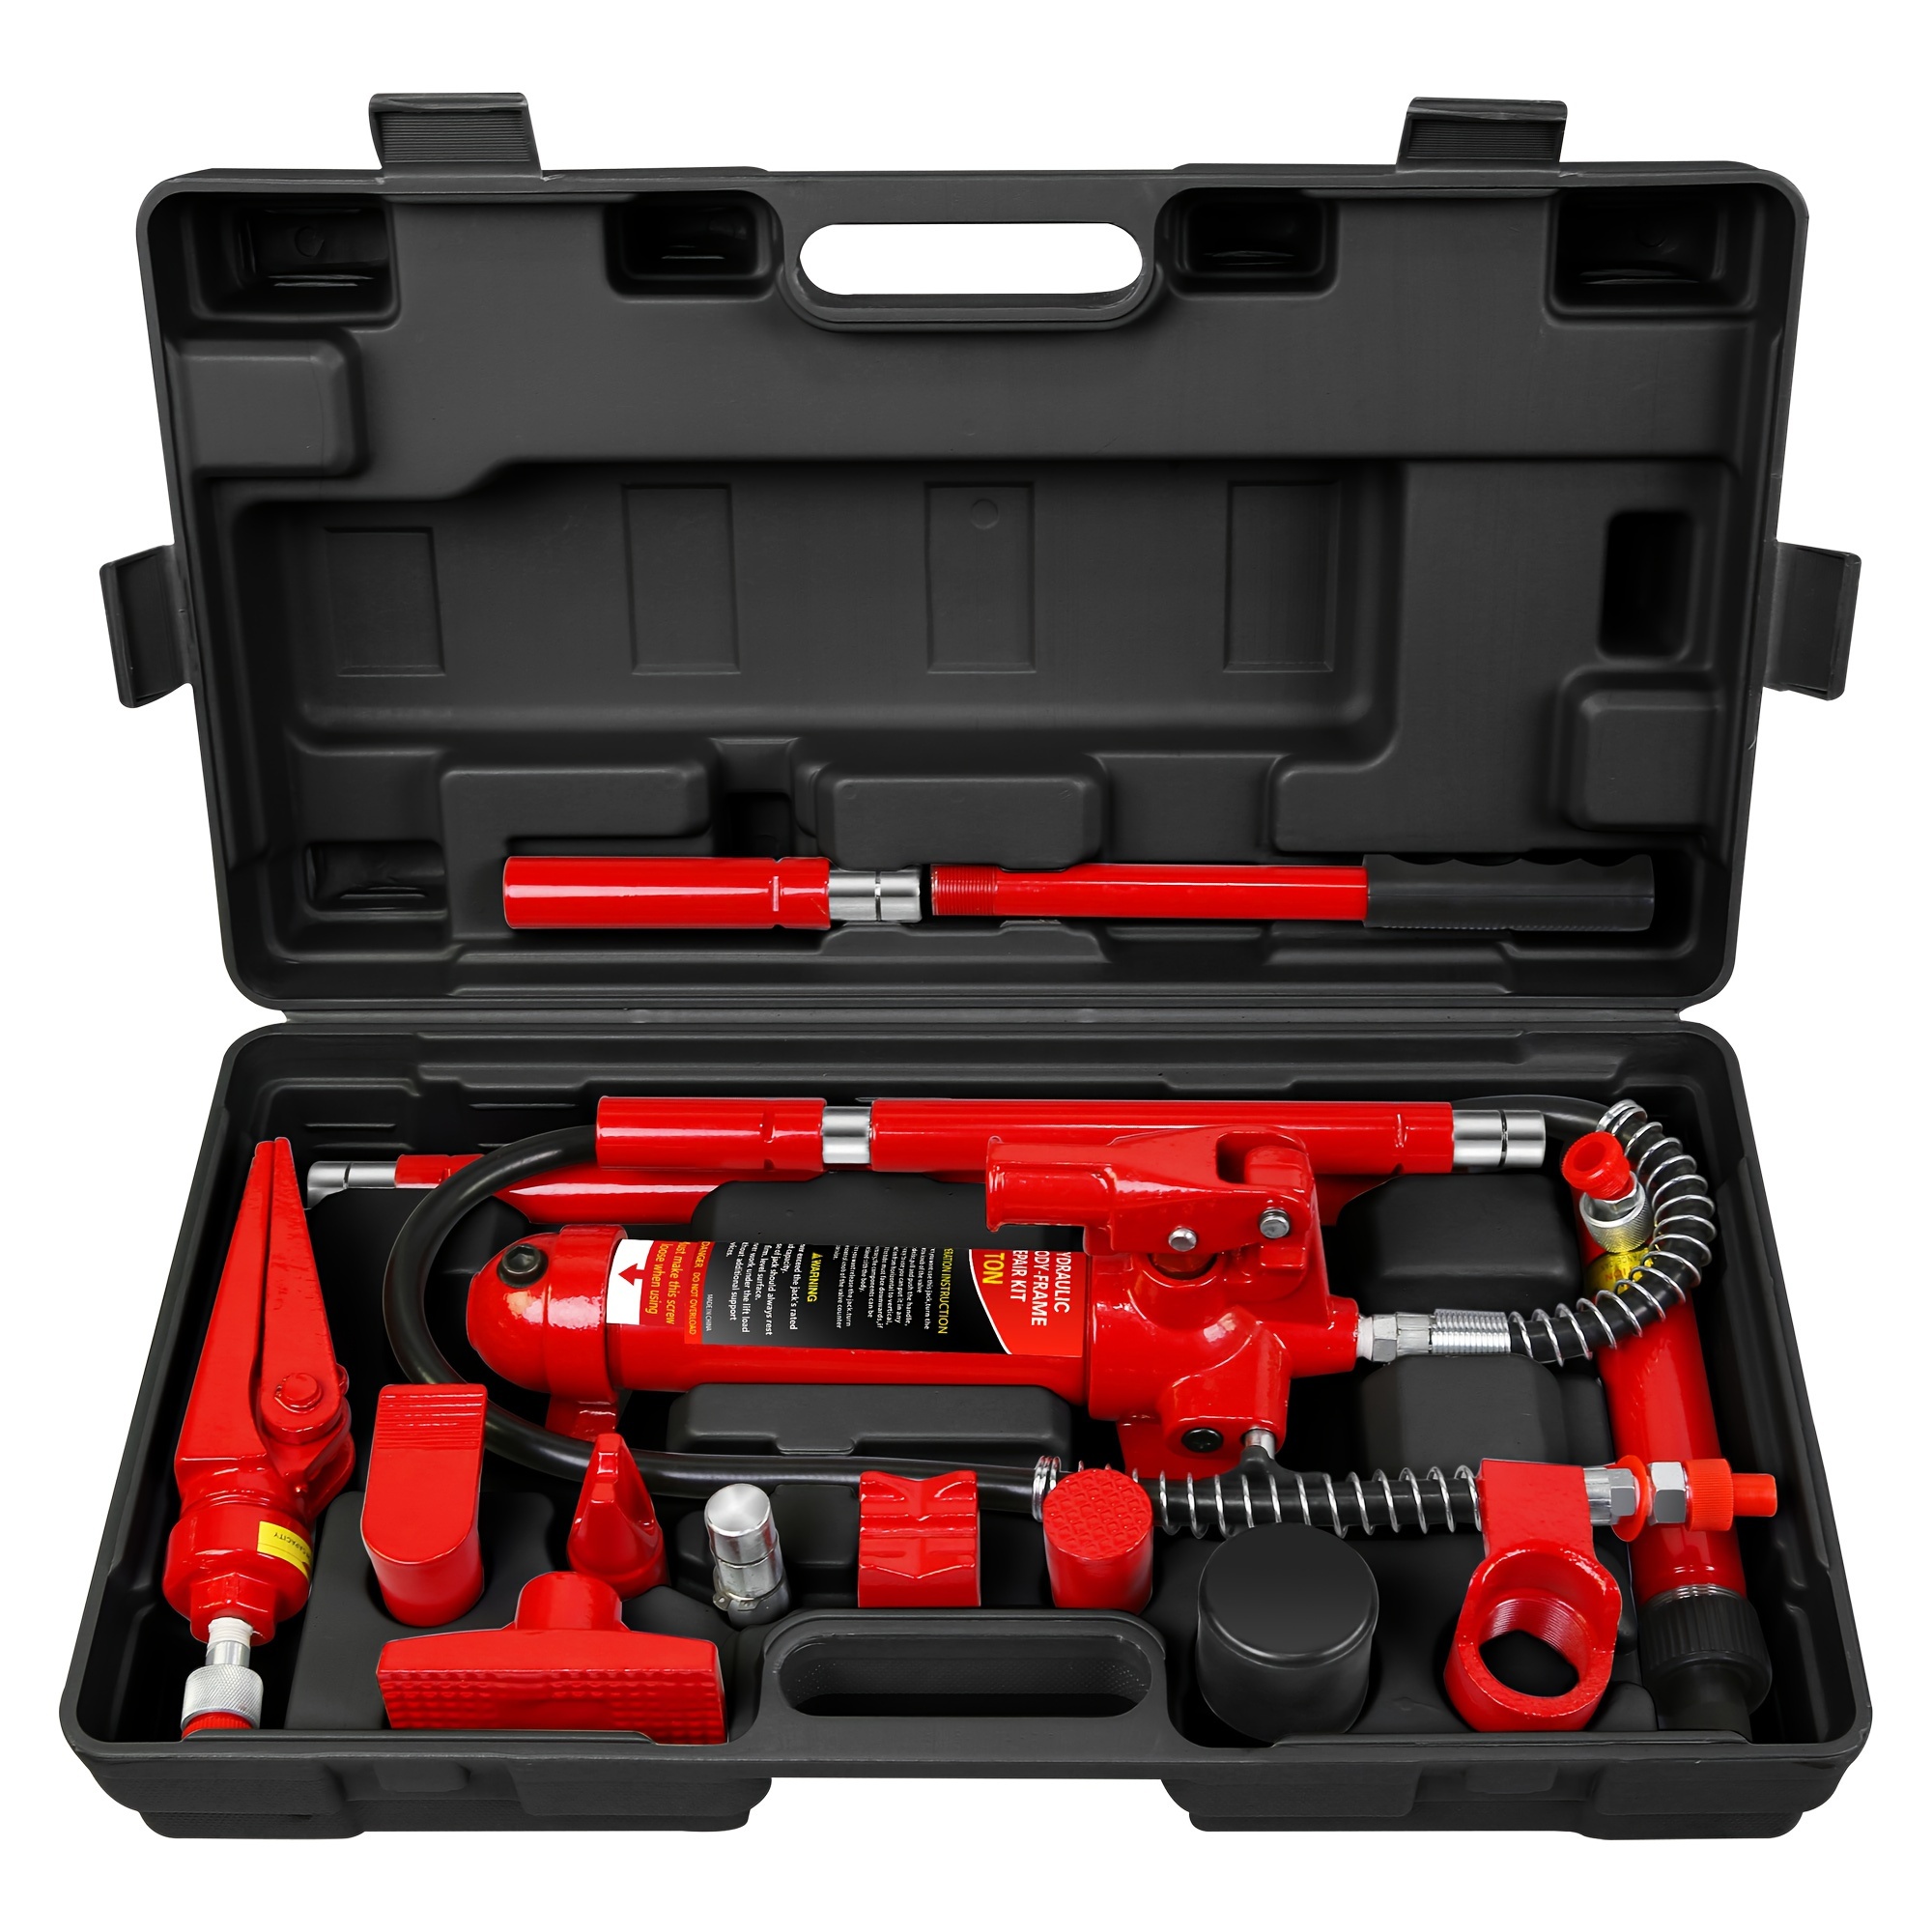 

4 Ton Porta Power Kit, Portable Hydraulic Jack With Oil Hose, Auto Body Frame Repair Kit With Storage Case For Car Repair, Truck, Farm